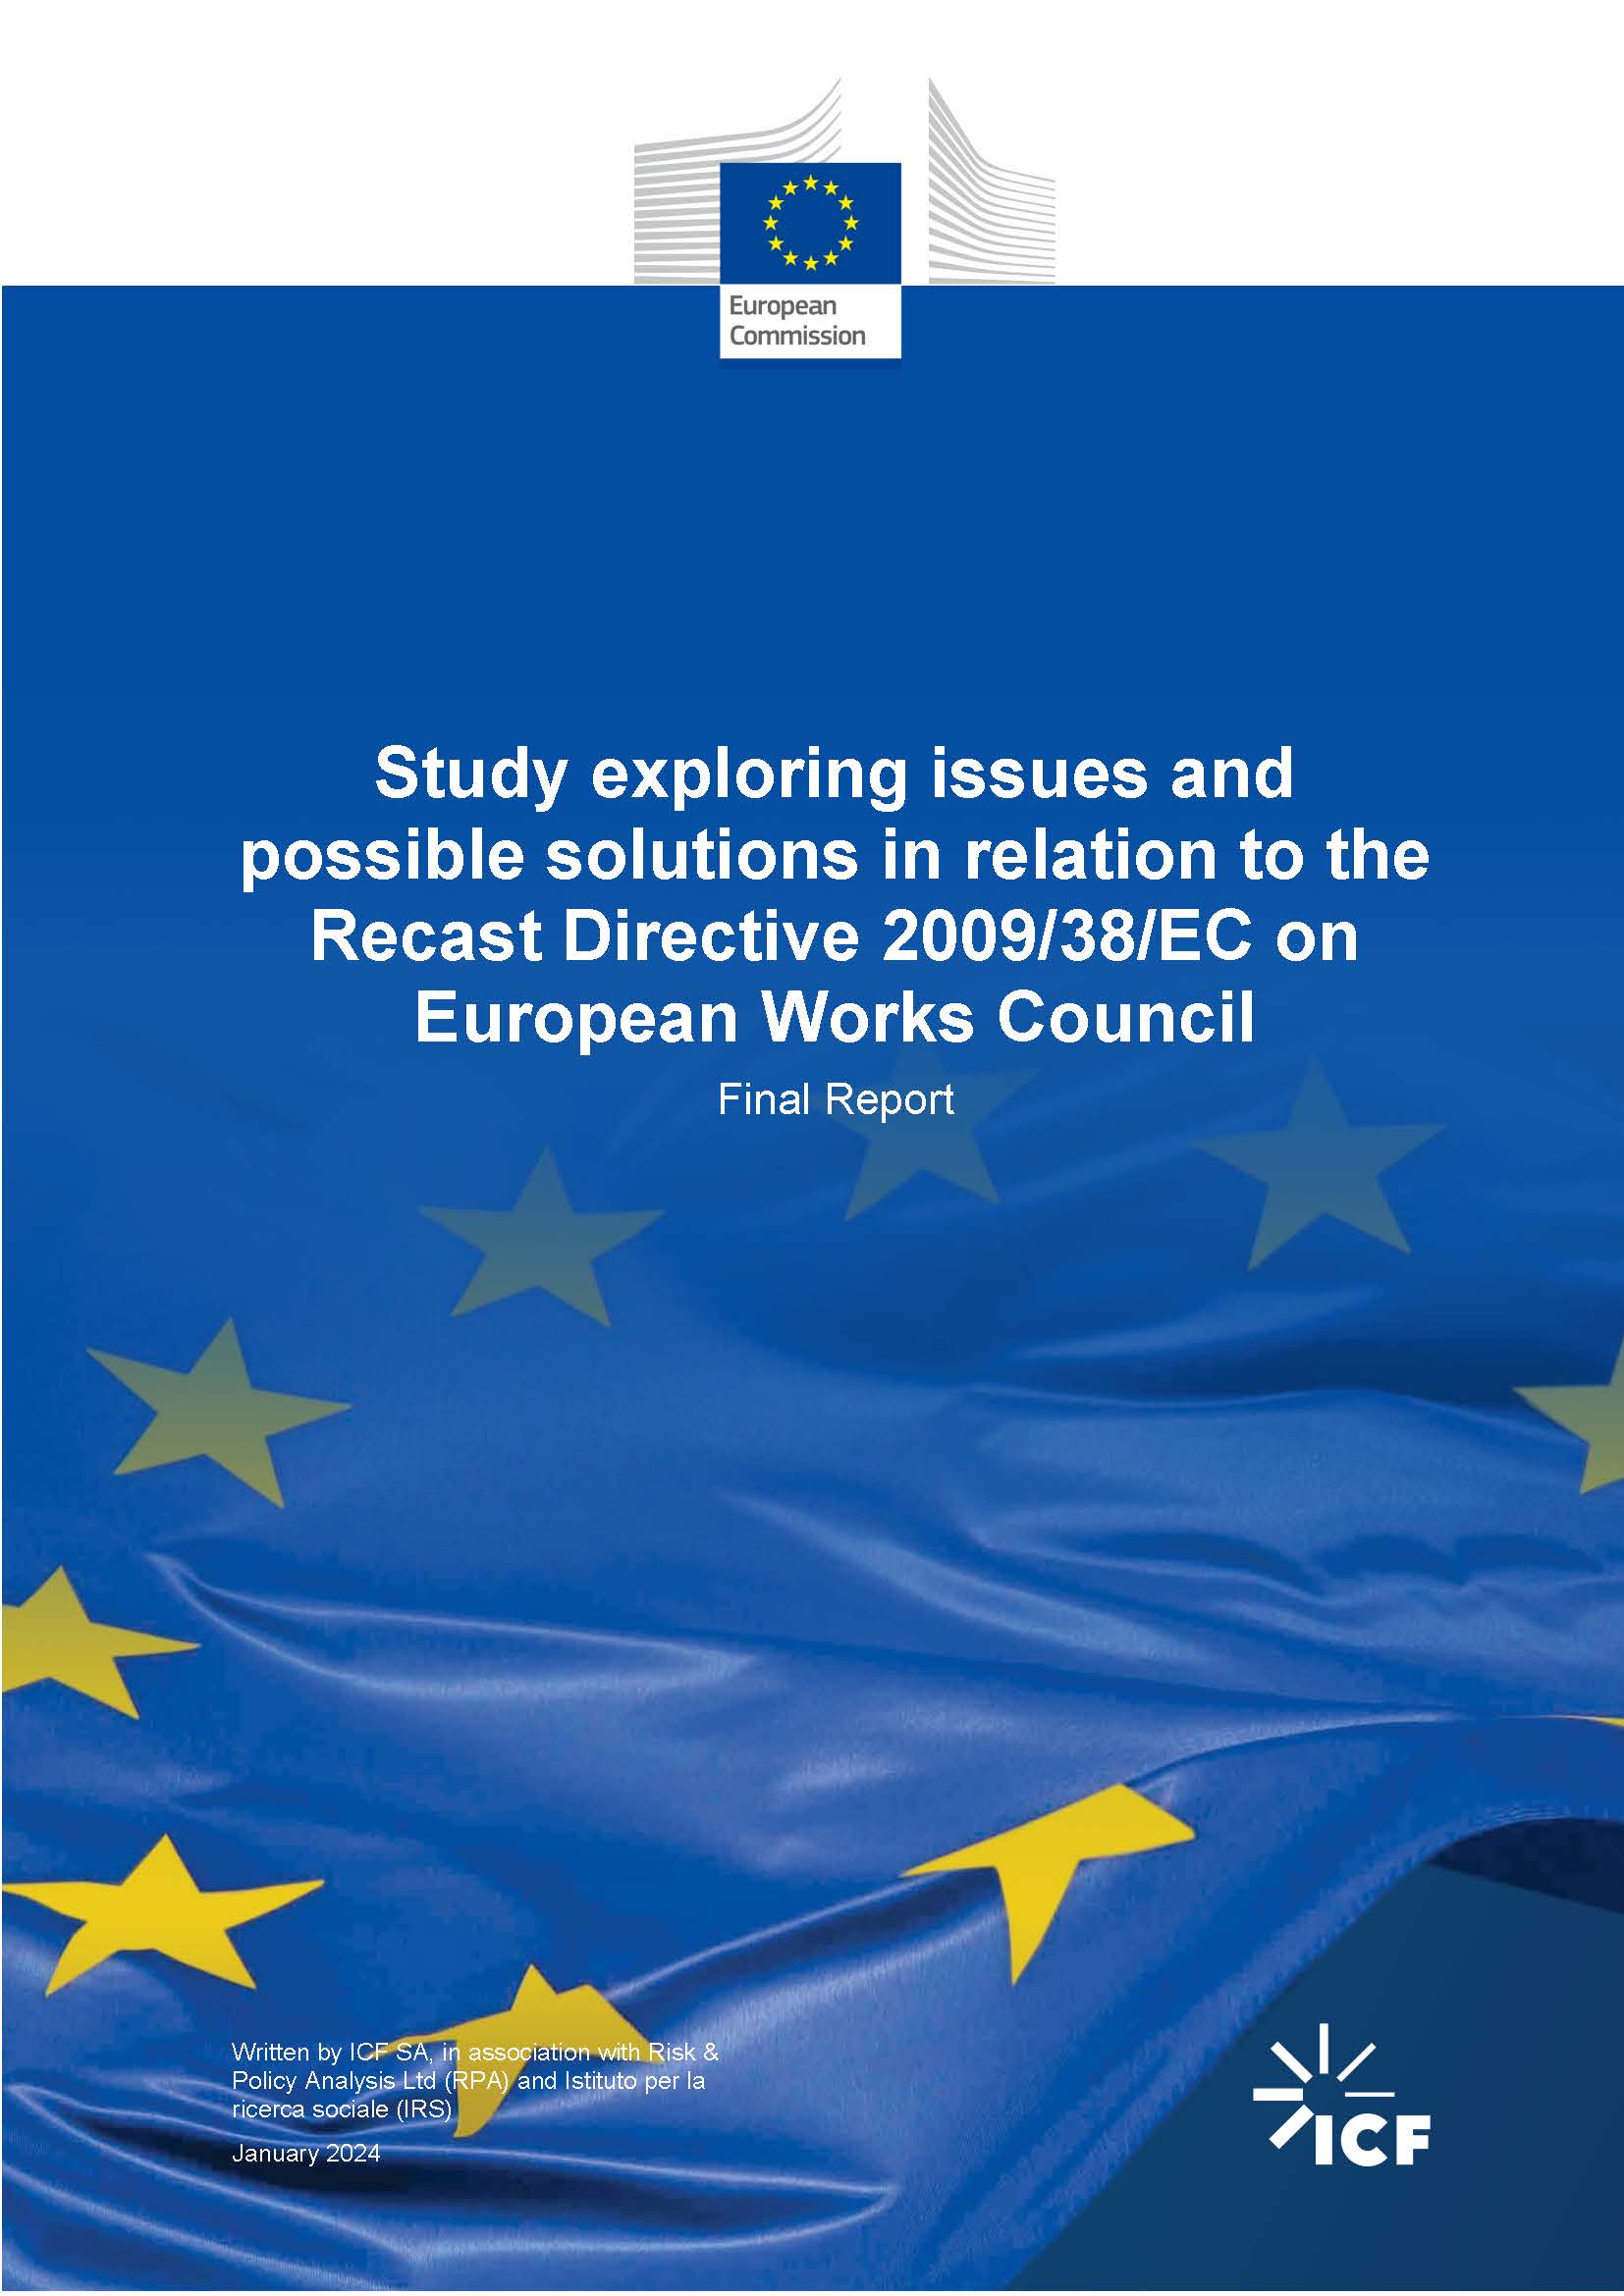 Study exploring issues and possible solutions in relation to the Recast Directive 2009/38/EC on European Works Council